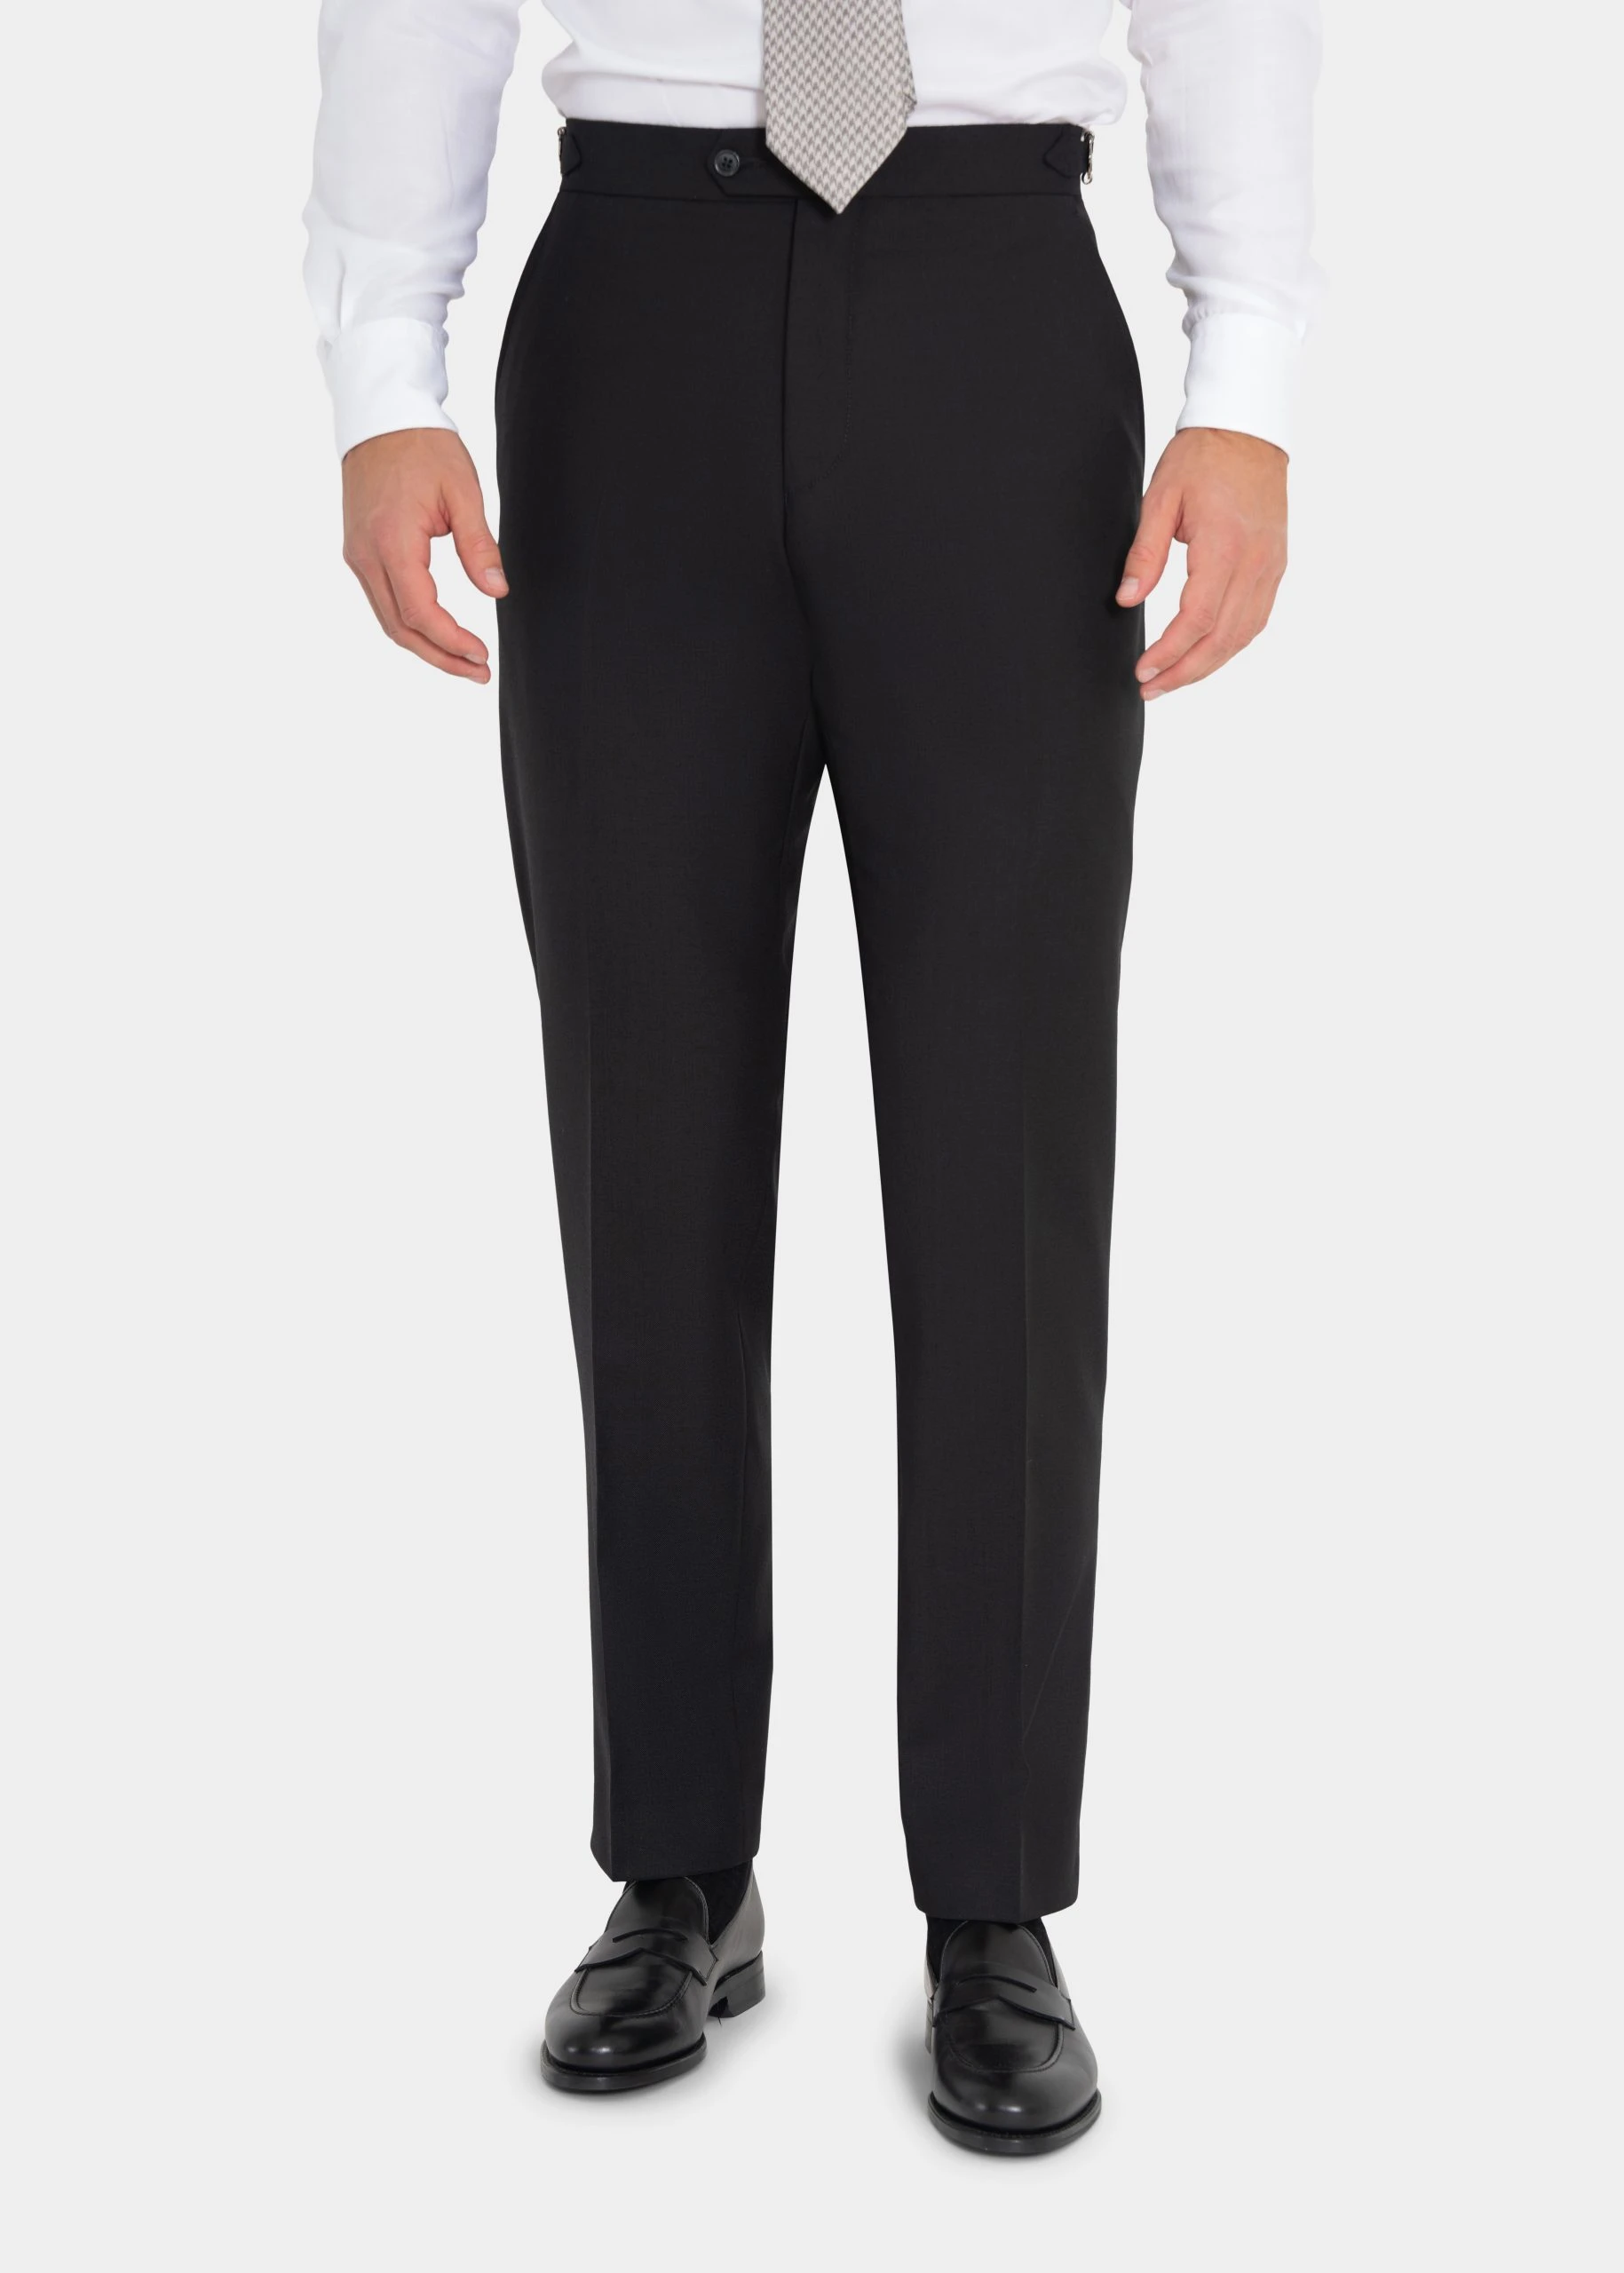 black suit trousers in twistair fabric